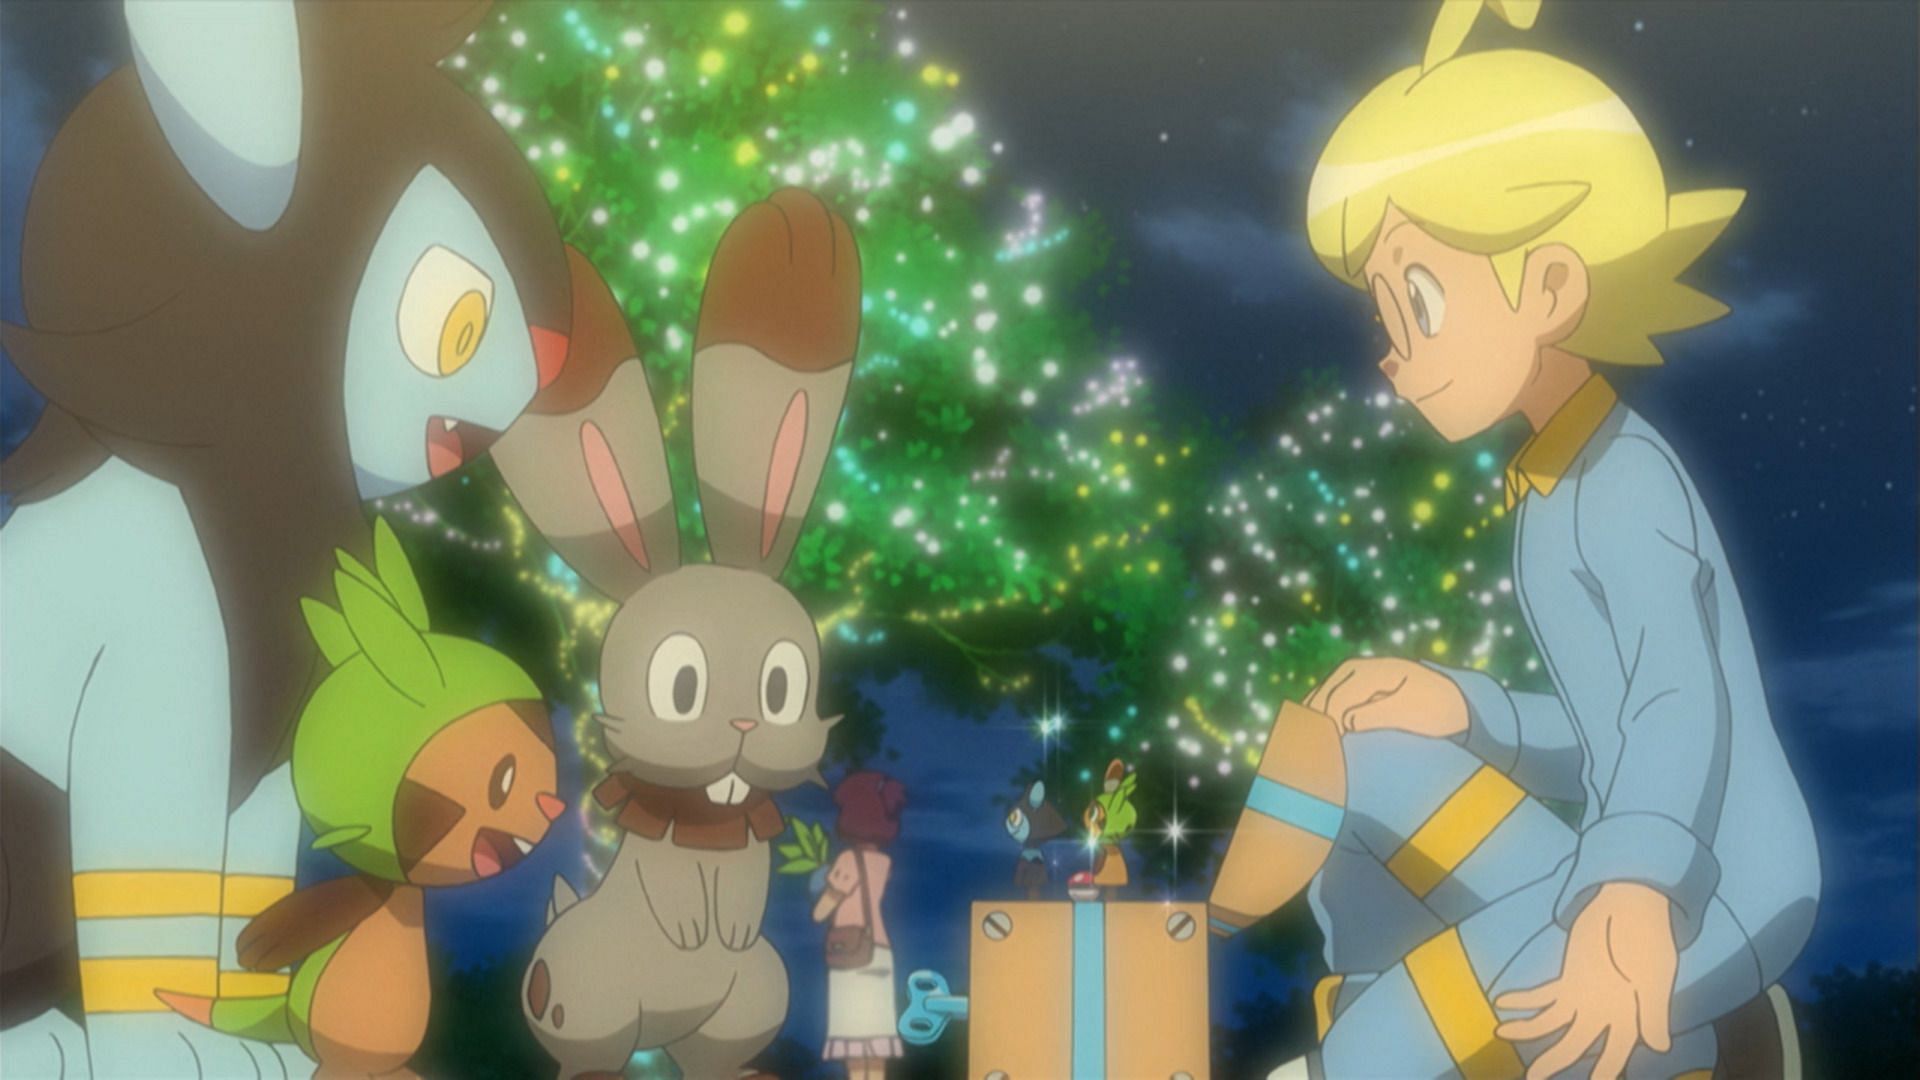 Clemont giving a gift box in the anime